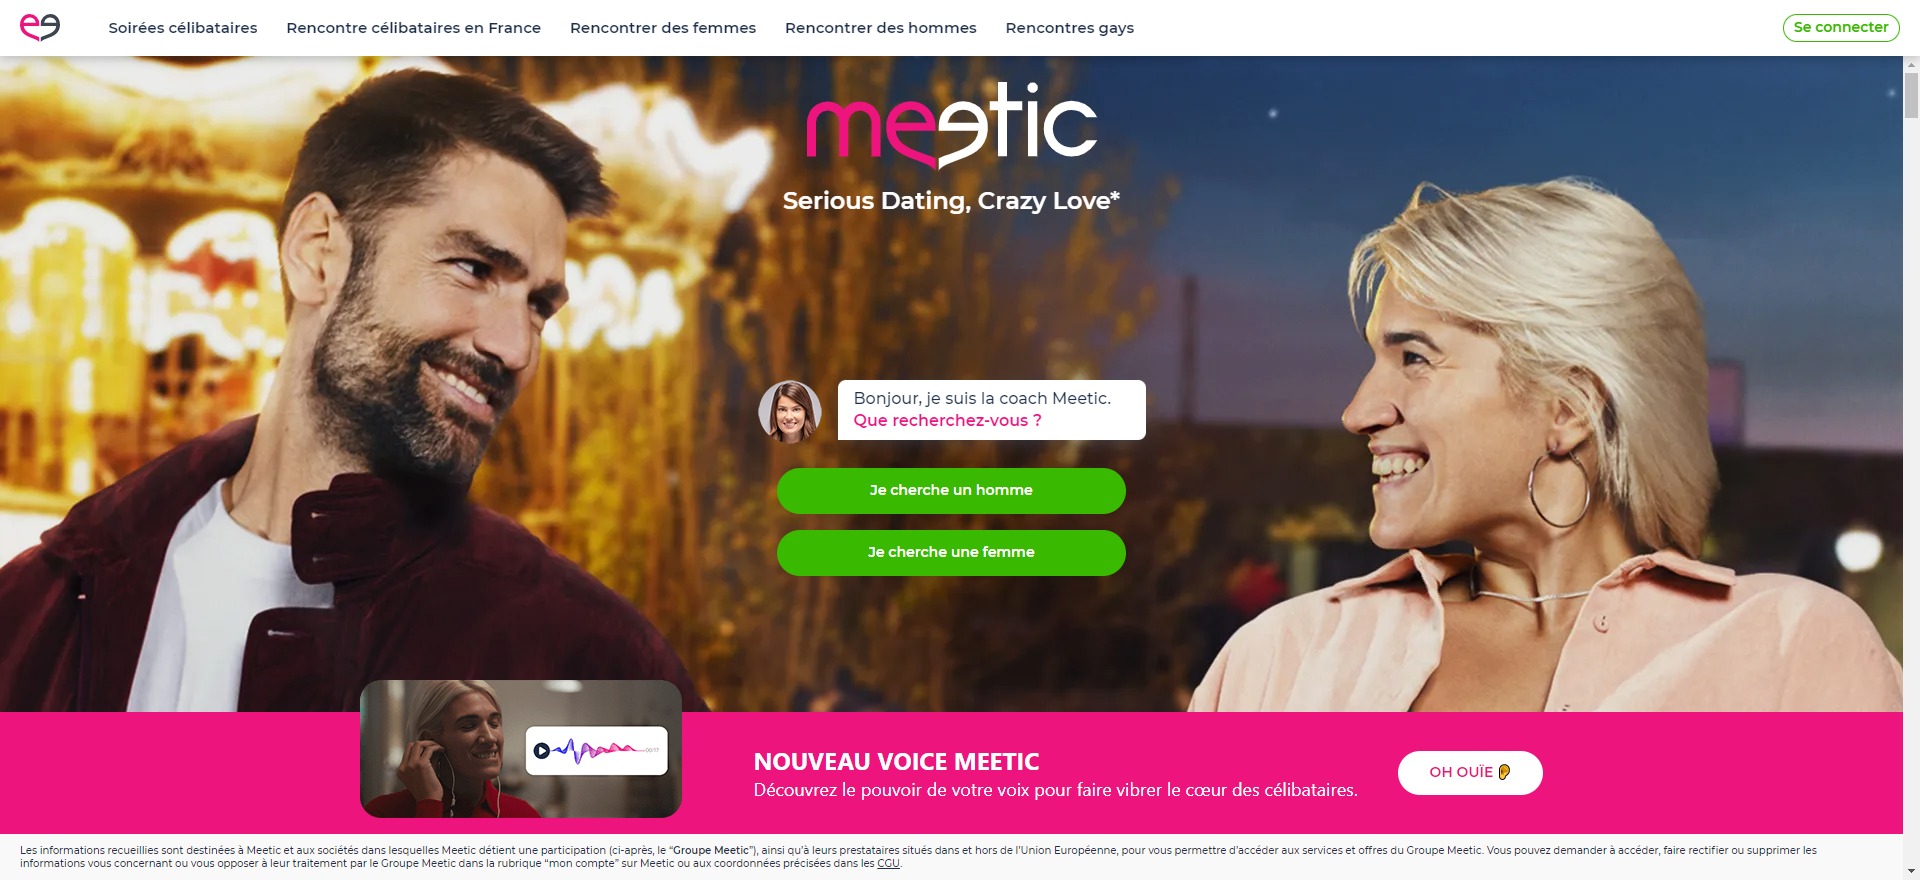 Meetic: Everything You Need to Know